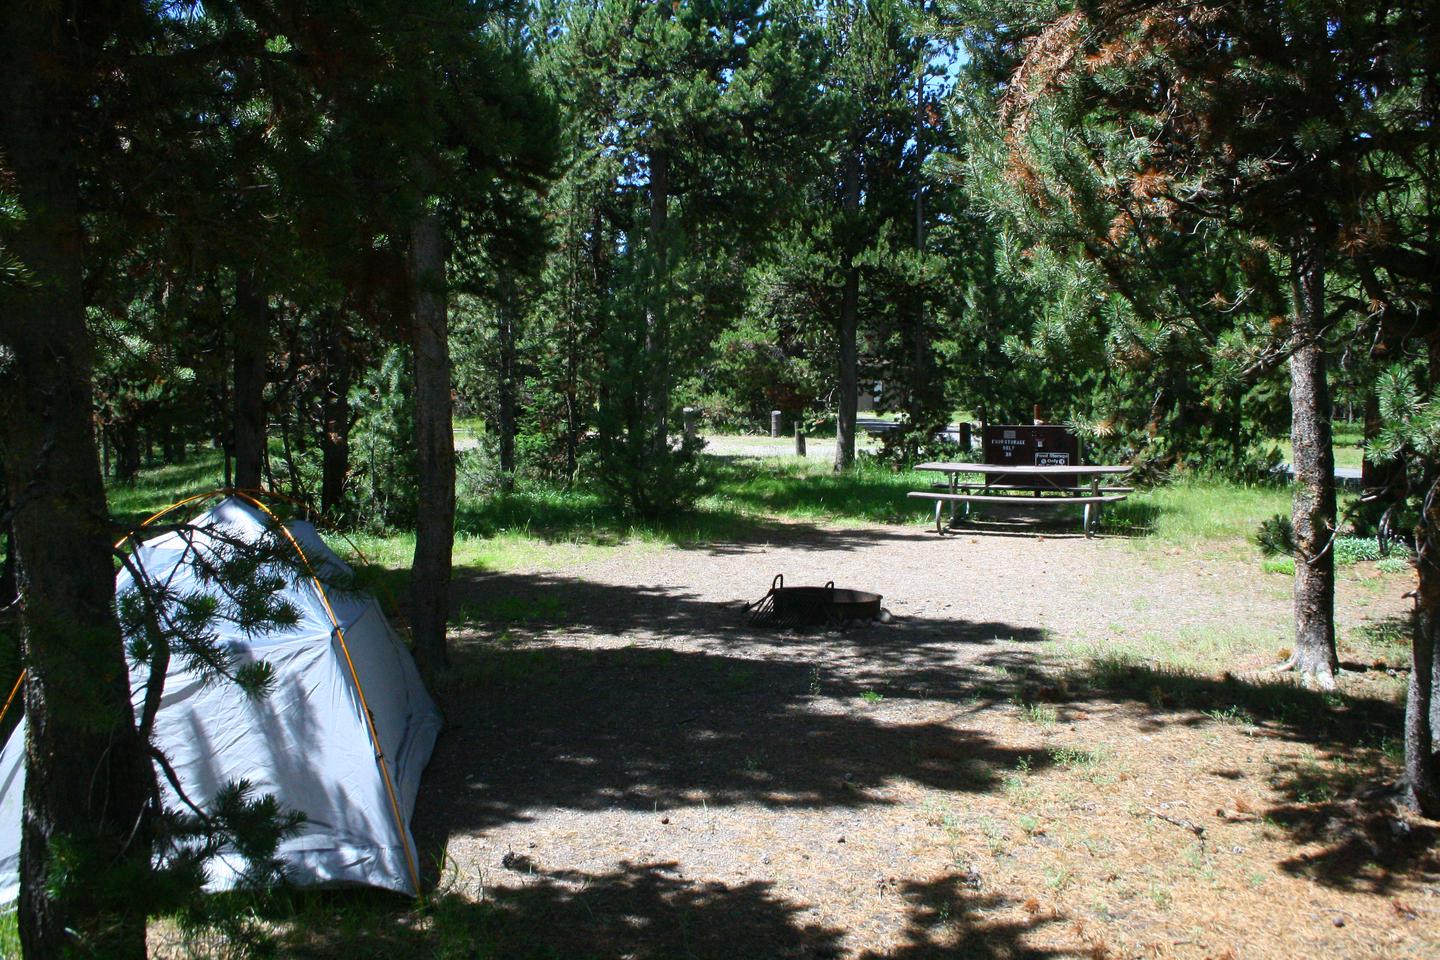 Indian Creek Campground site #30.........Indian Creek Campground site #30